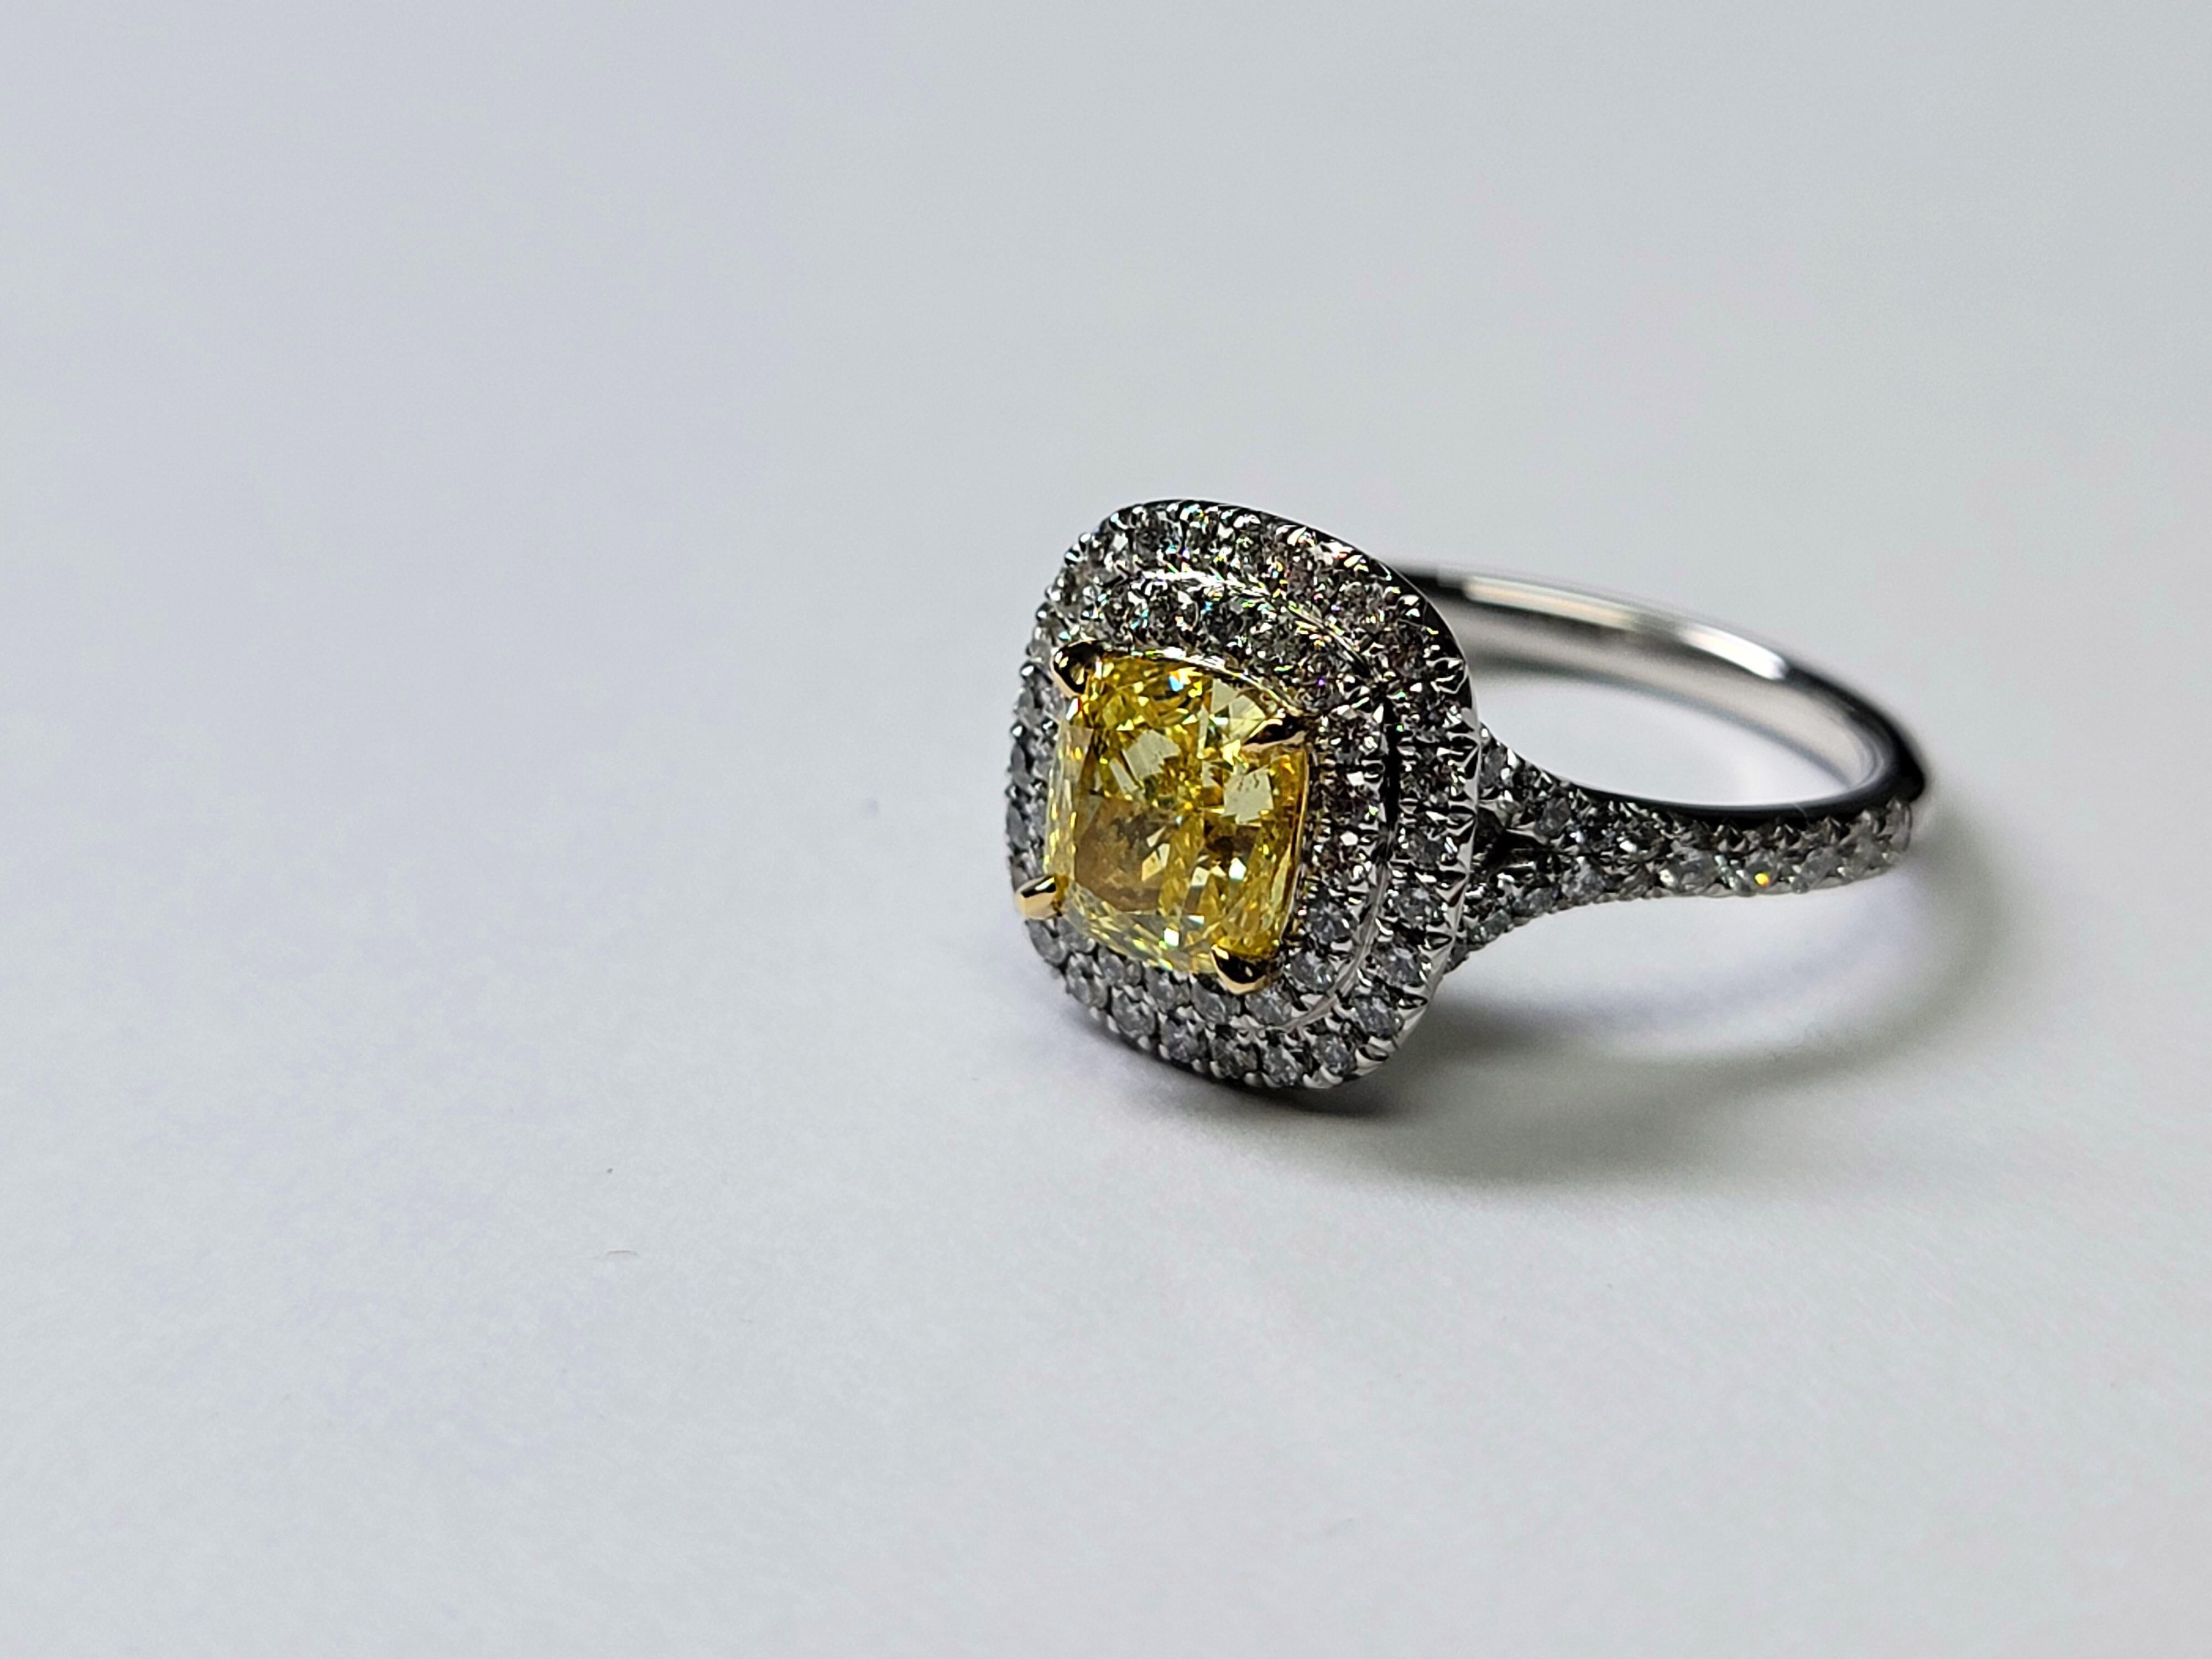 GIA Certified 1.54 cts Fancy Yellow Cushion Diamond Ring Halo Ring 18k WH Gold In New Condition For Sale In Kowloon, HK